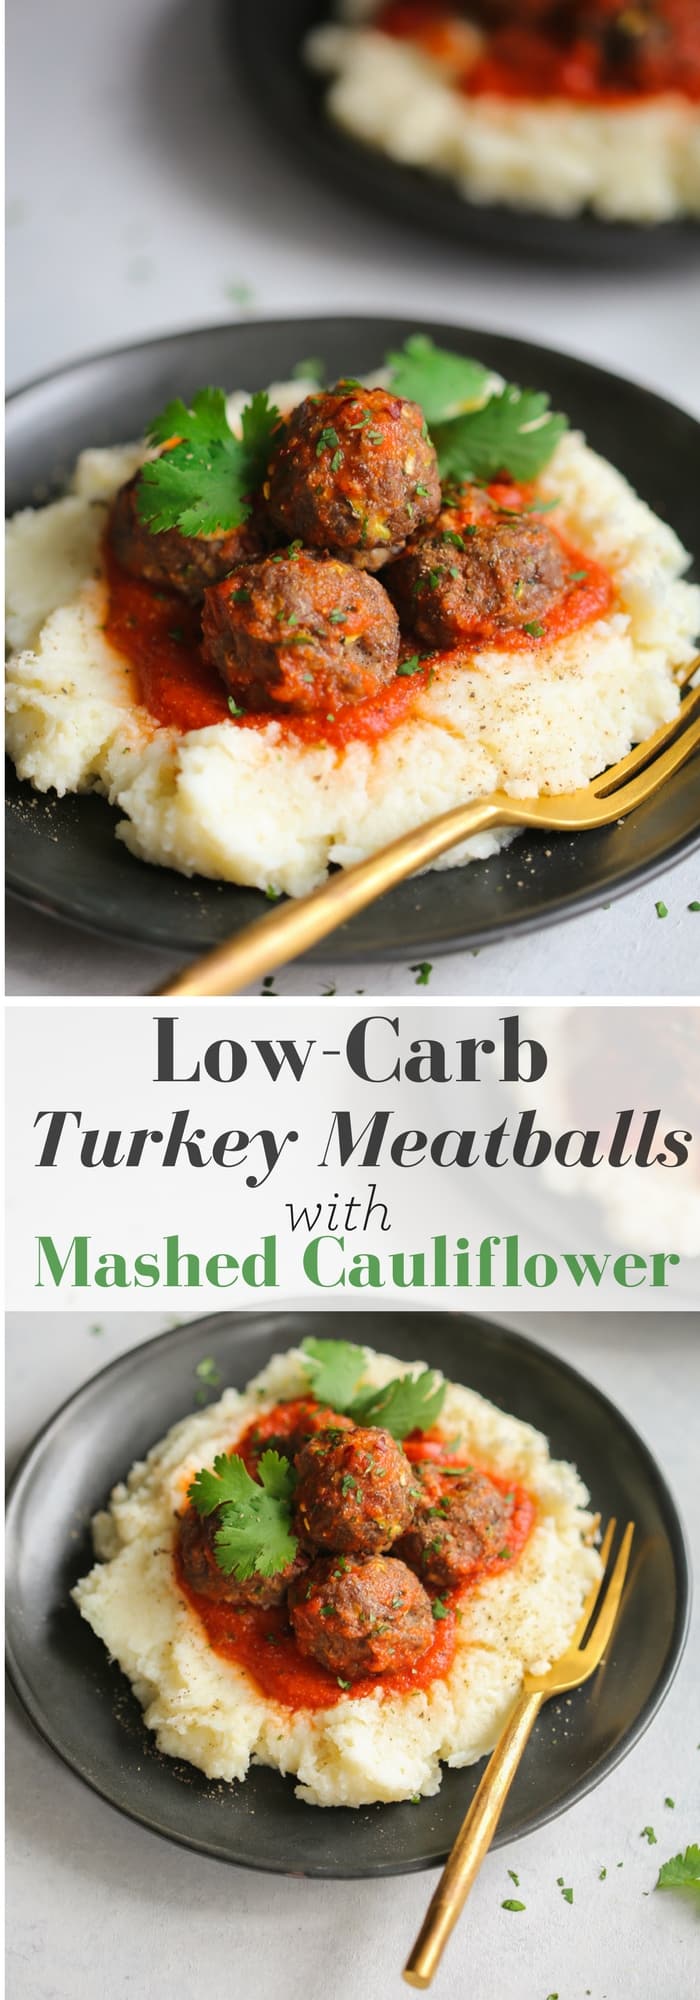 This Low-carb Turkey Meatballs with Mashed Cauliflower is a delicious meal for your low-carb diet. The meatballs are made with parmesan cheese and almond flour and the mashed cauliflower has a perfect smooth texture that you and your family will love.